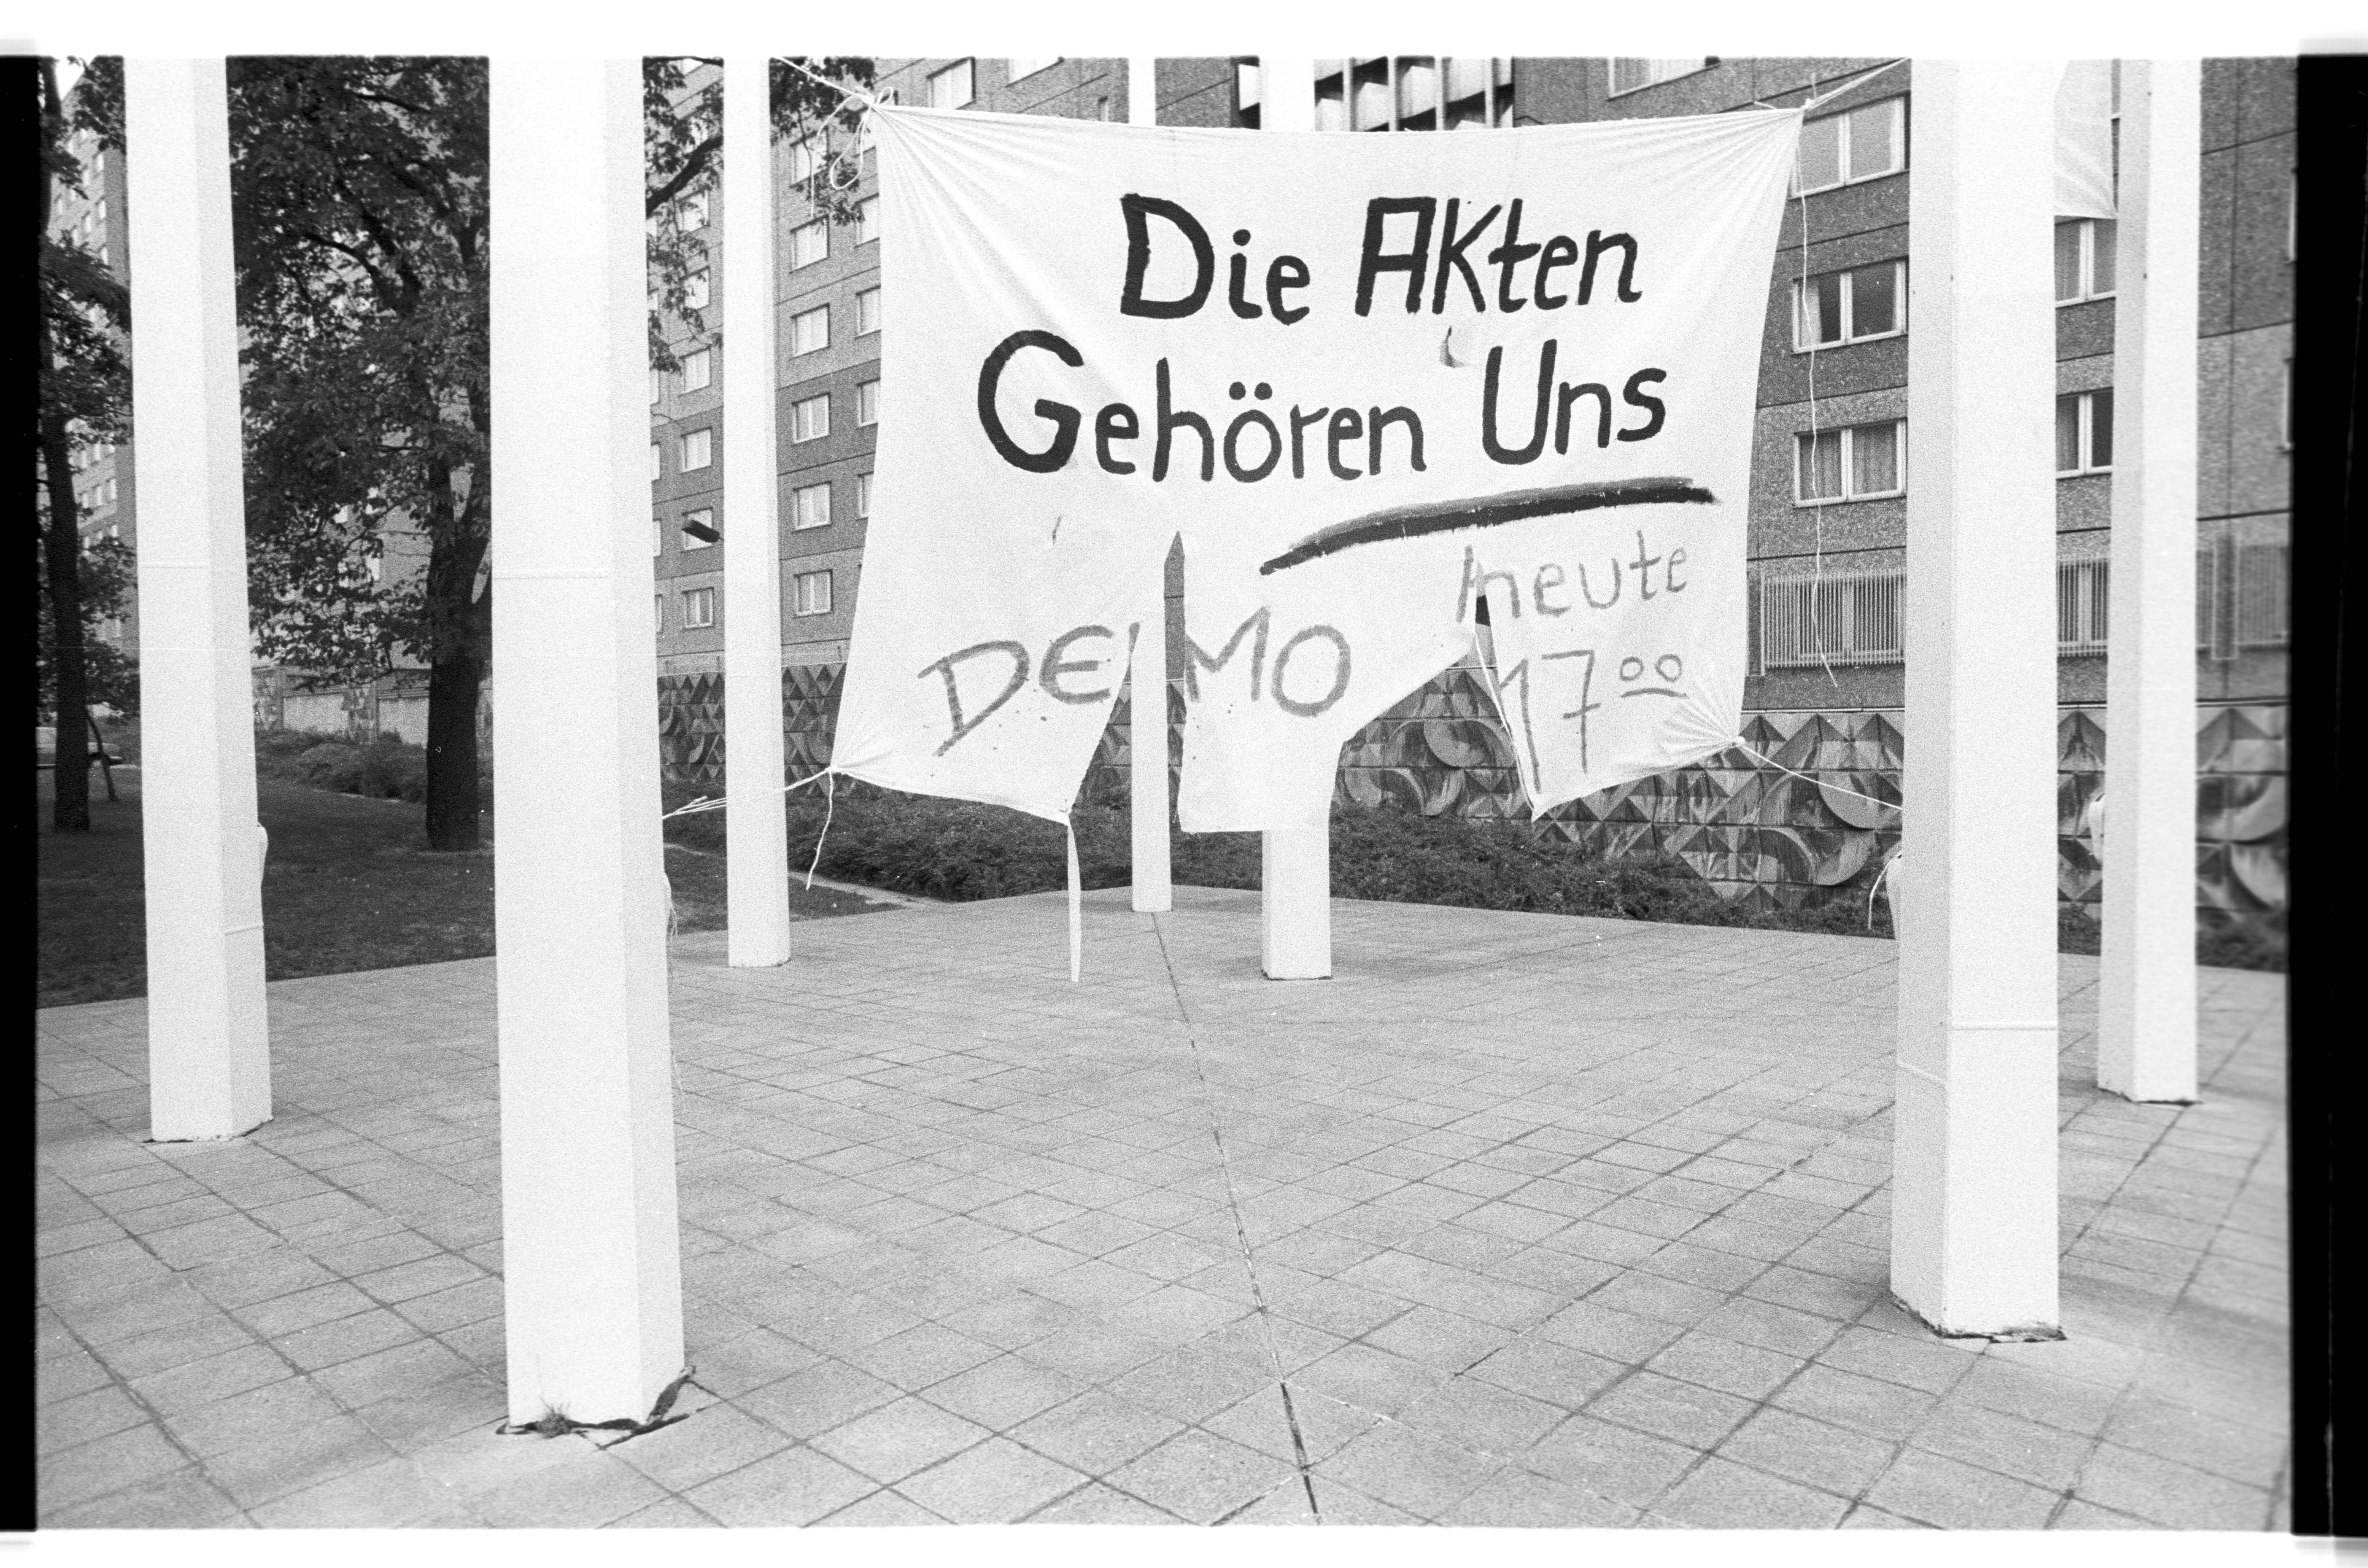 'The files are belonging to us' - Call for an demonstration, September 1990